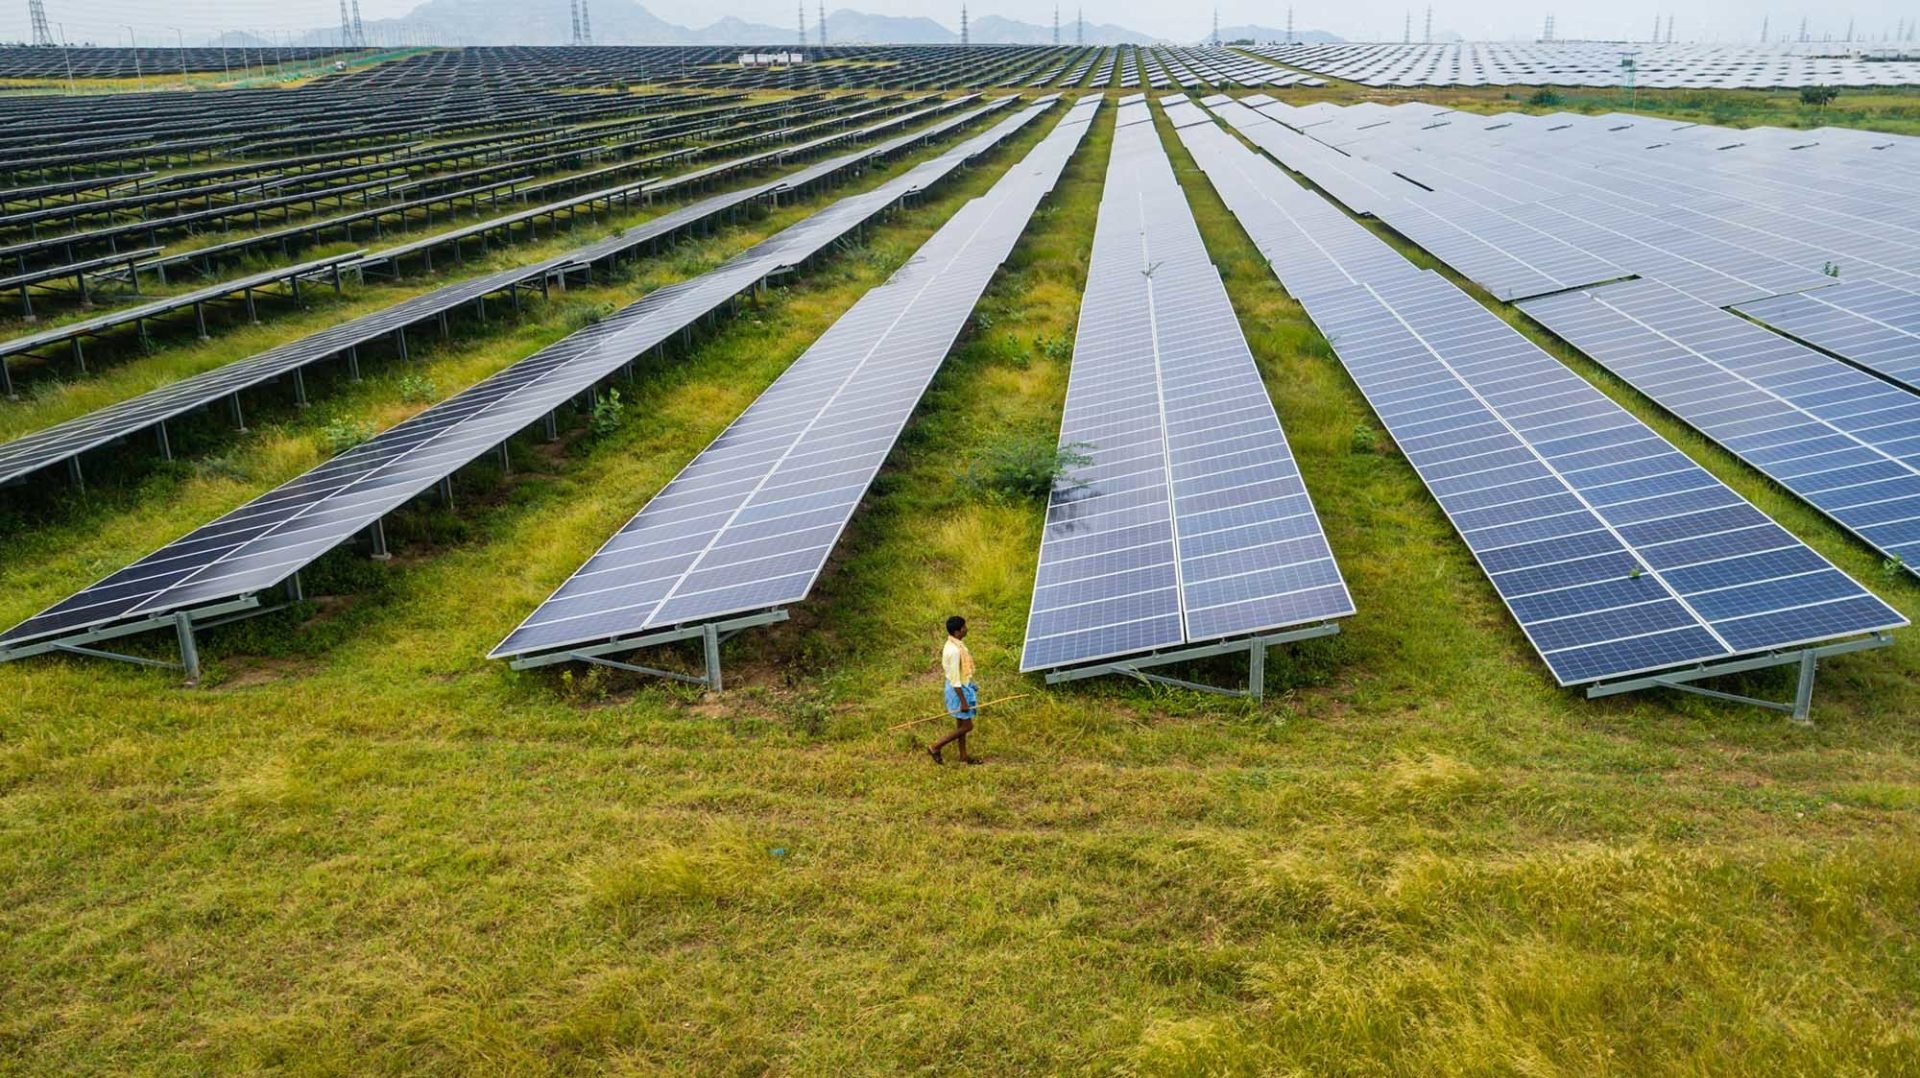 BENGALURU, INDIA - OCTOBER 11: An aerial view shows a shepherd walk past photovoltaic cell solar panels in the Pavagada Solar Park on October 11, 2021 in Kyataganacharulu village, Karnataka, India. As the countdown to the United Nations Climate Change Conference (COP26) at Glasgow begins, India is in a formidable position to lead climate change conversations as the country is on its way to meet its renewable energy target of 175GW by 2022, with solar power alone contributing to 100GW. In a clutch of villages around the Pavagada solar park in the southern state of Karnataka where nearly 13,000 acres of land has been acquired on lease for 28 years to produce 2050MW of electricity, economic inequity is becoming apparent — while farmers with large land holdings have clearly benefitted, poor farmers with no land have further been pushed to the margins with rising unemployment, lack of basic infrastructure, and a loss of their cultural identity. (Photo by Abhishek Chinnappa/Getty Images)